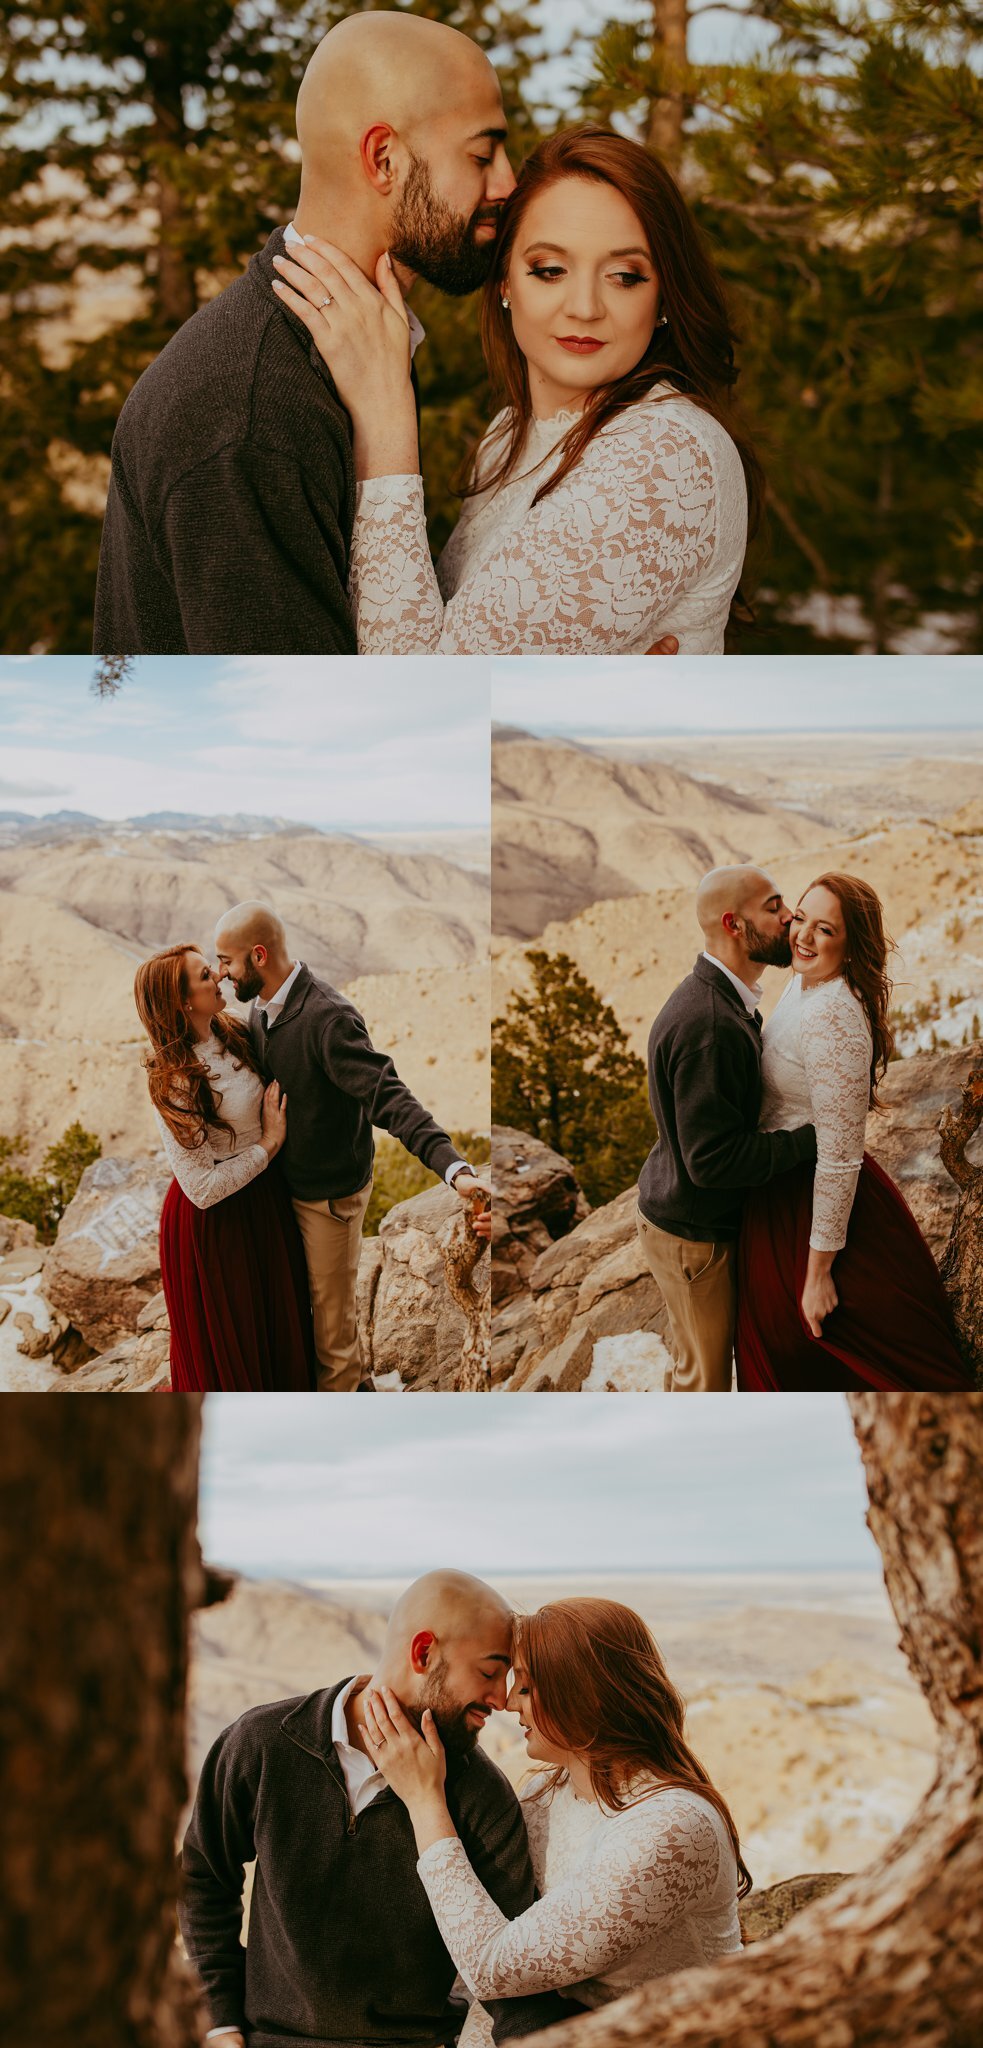 Winter Engagement Photos // Lookout Mountain in Golden, ColoradoWinter Engagement Photos // Lookout Mountain in Golden, Colorado